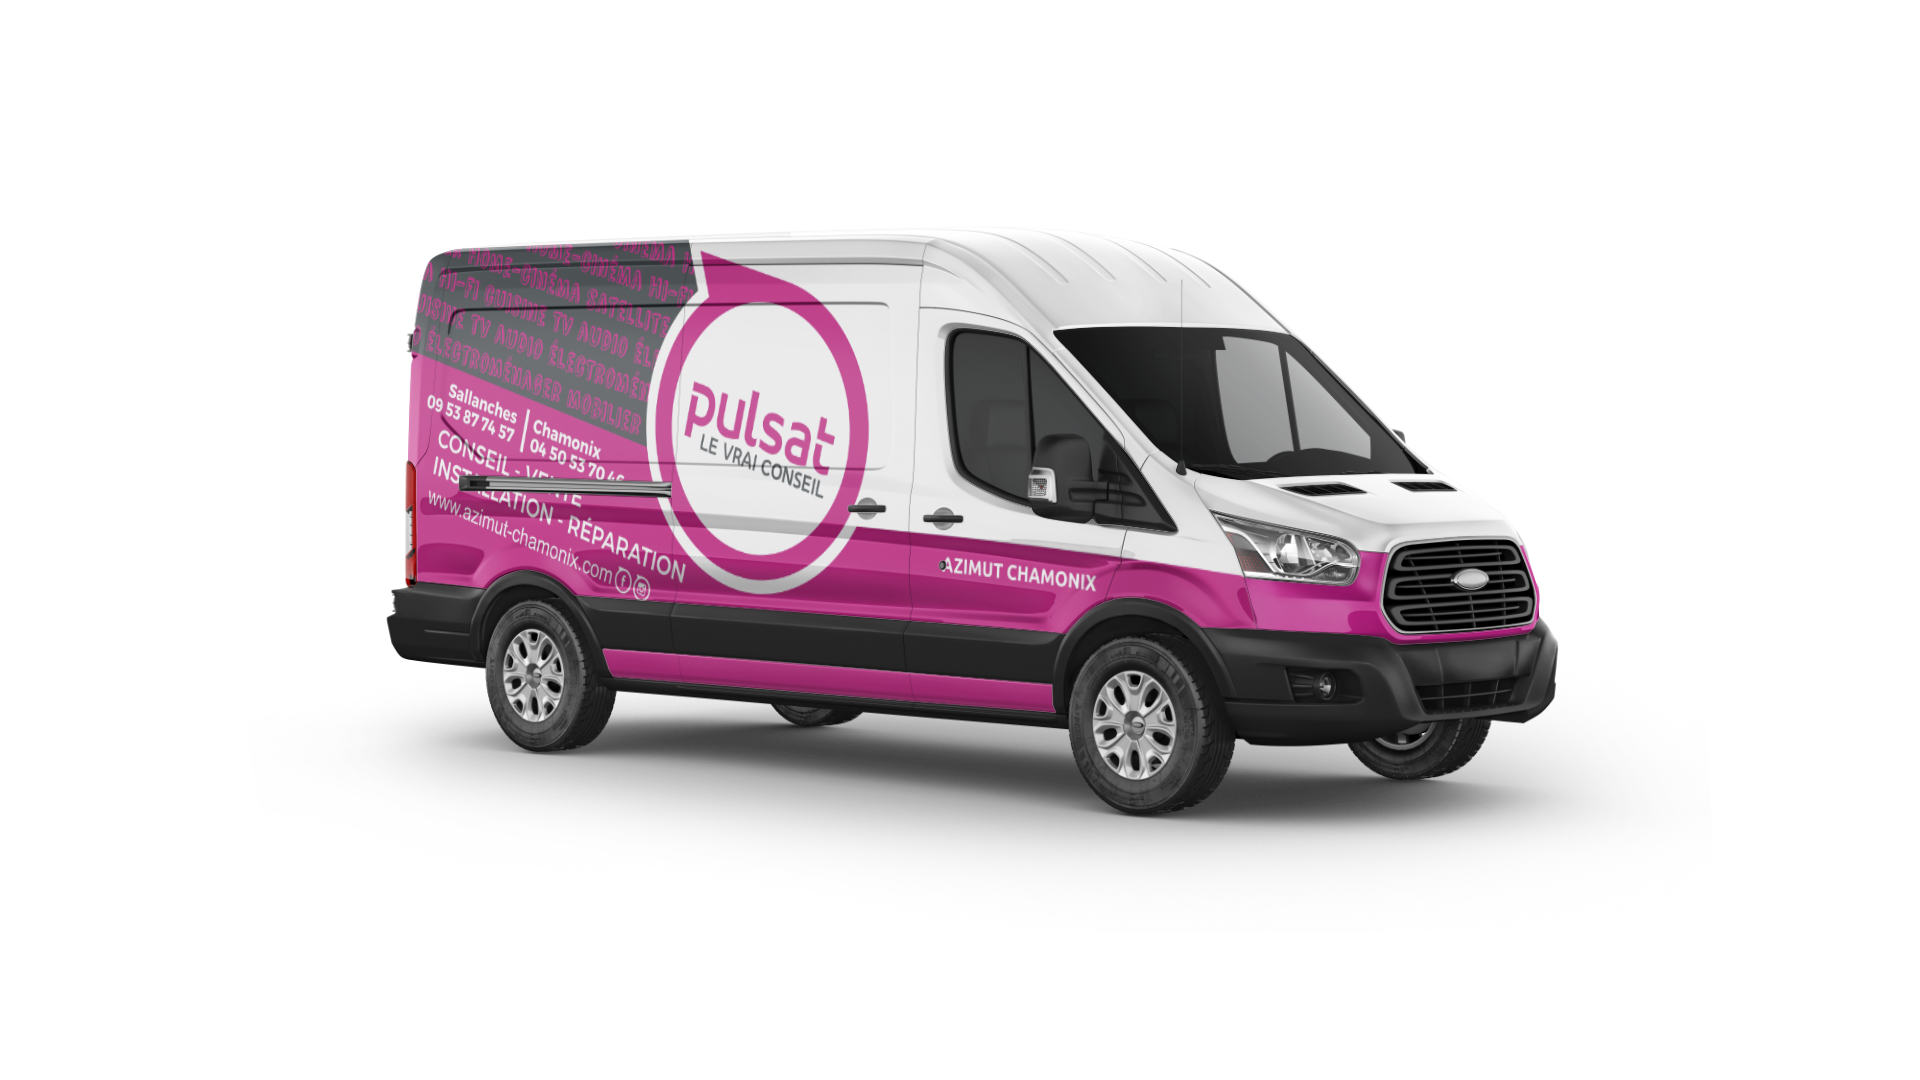 Covering voiture Ford Transit Pulsat